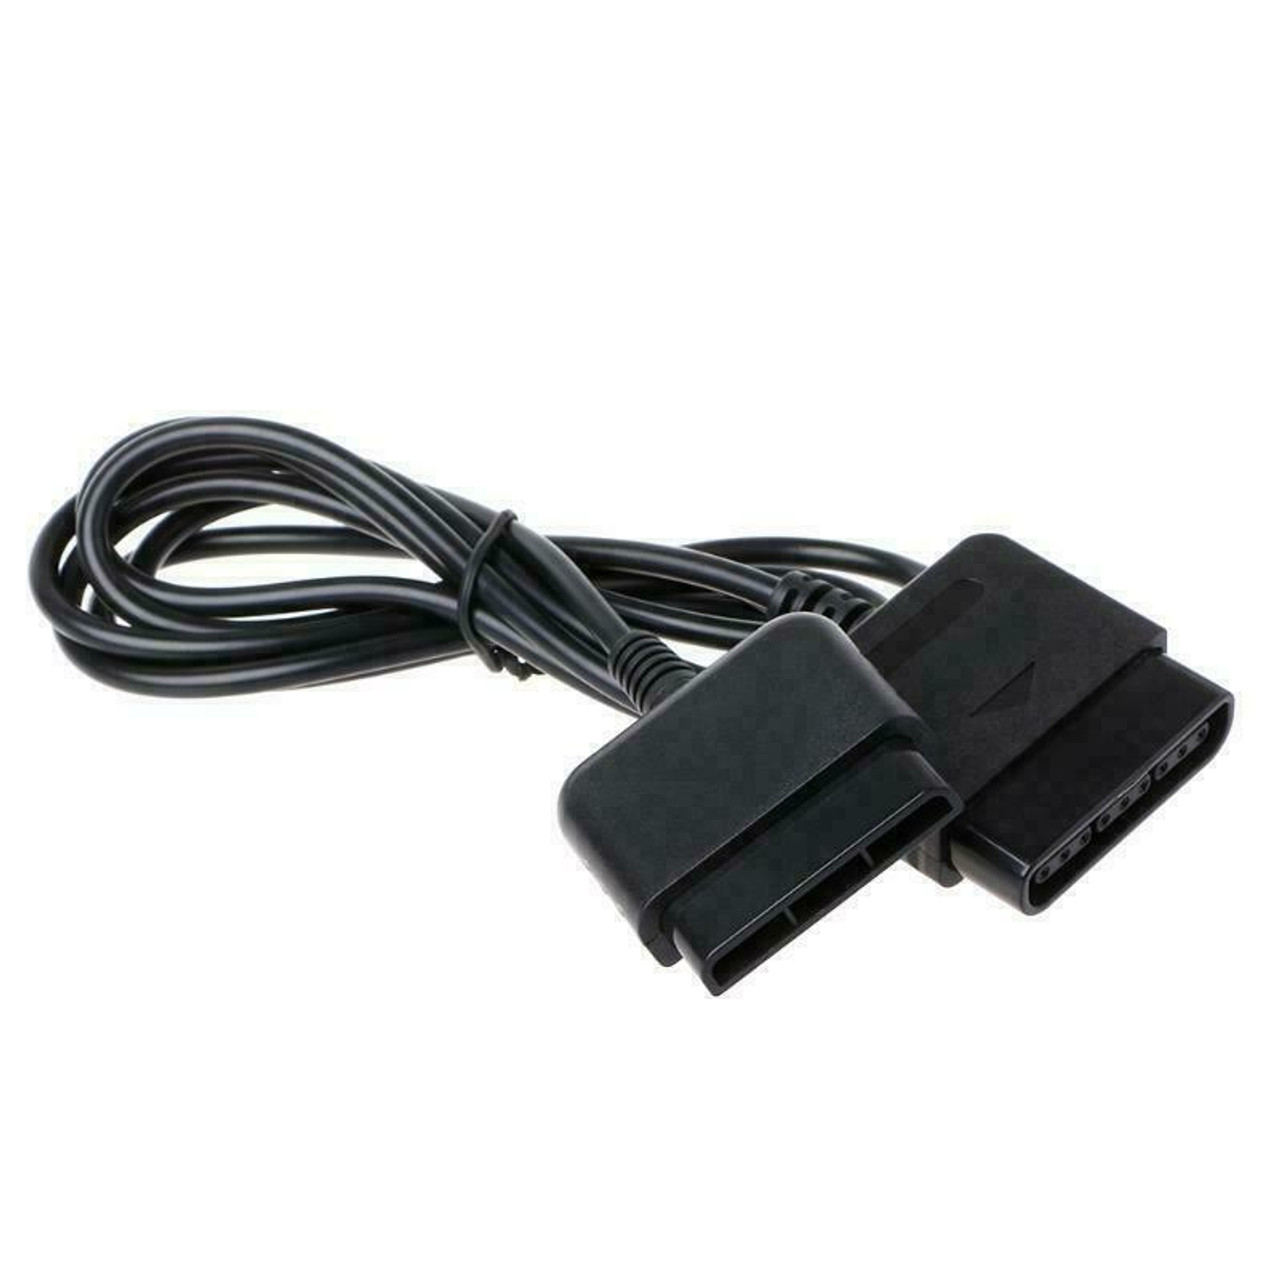 2-Pack Extension Cable For Sony Playstation 2 PS2 PS1 Controller Cord 6-FT 6FT